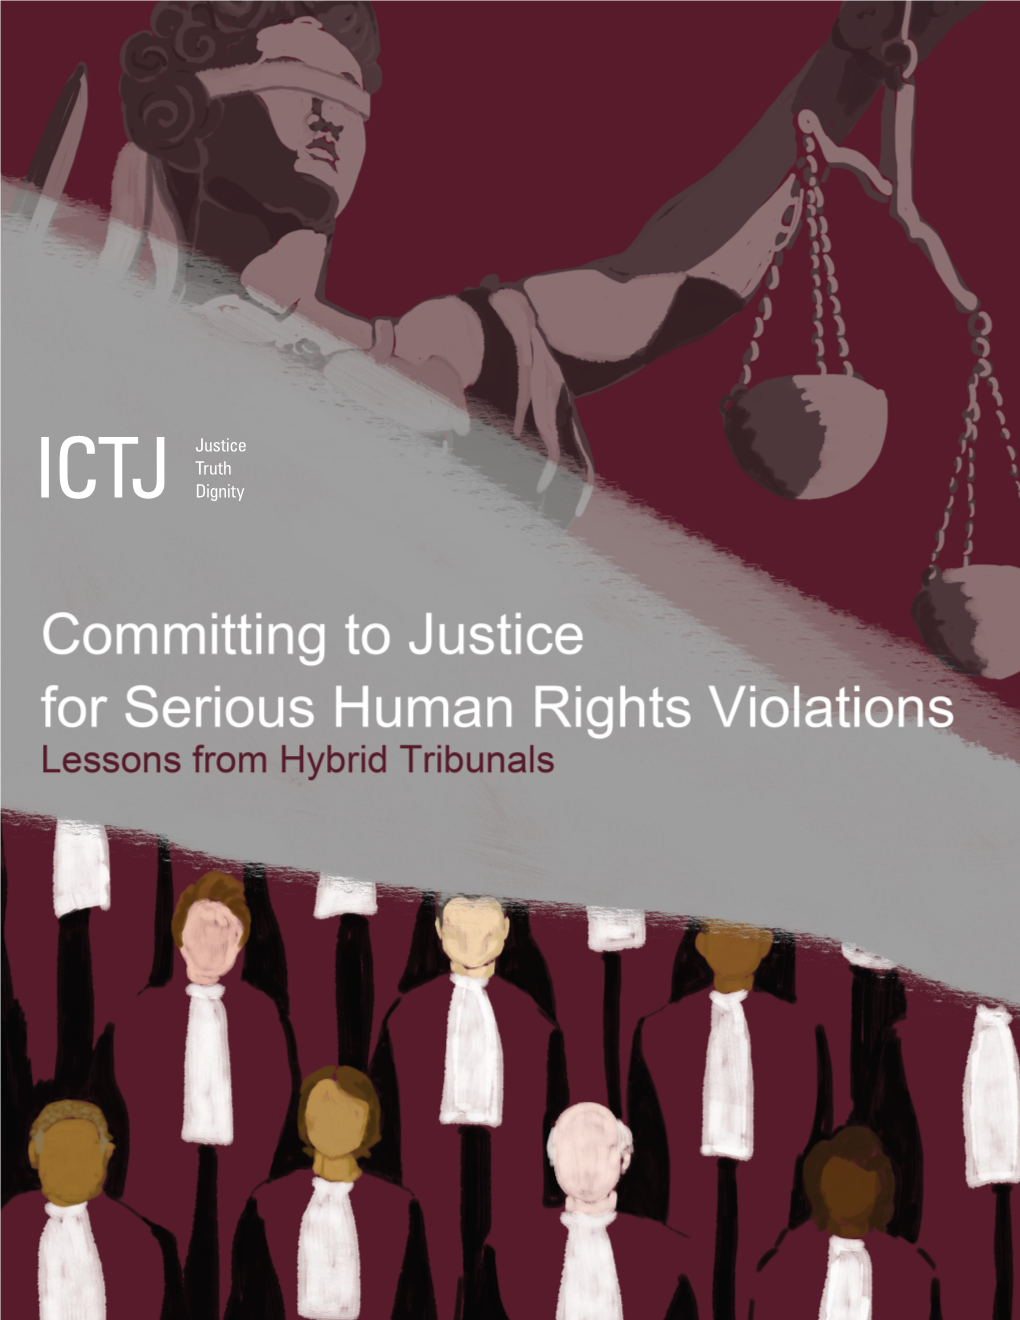 Lessons from Hybrid Tribunals